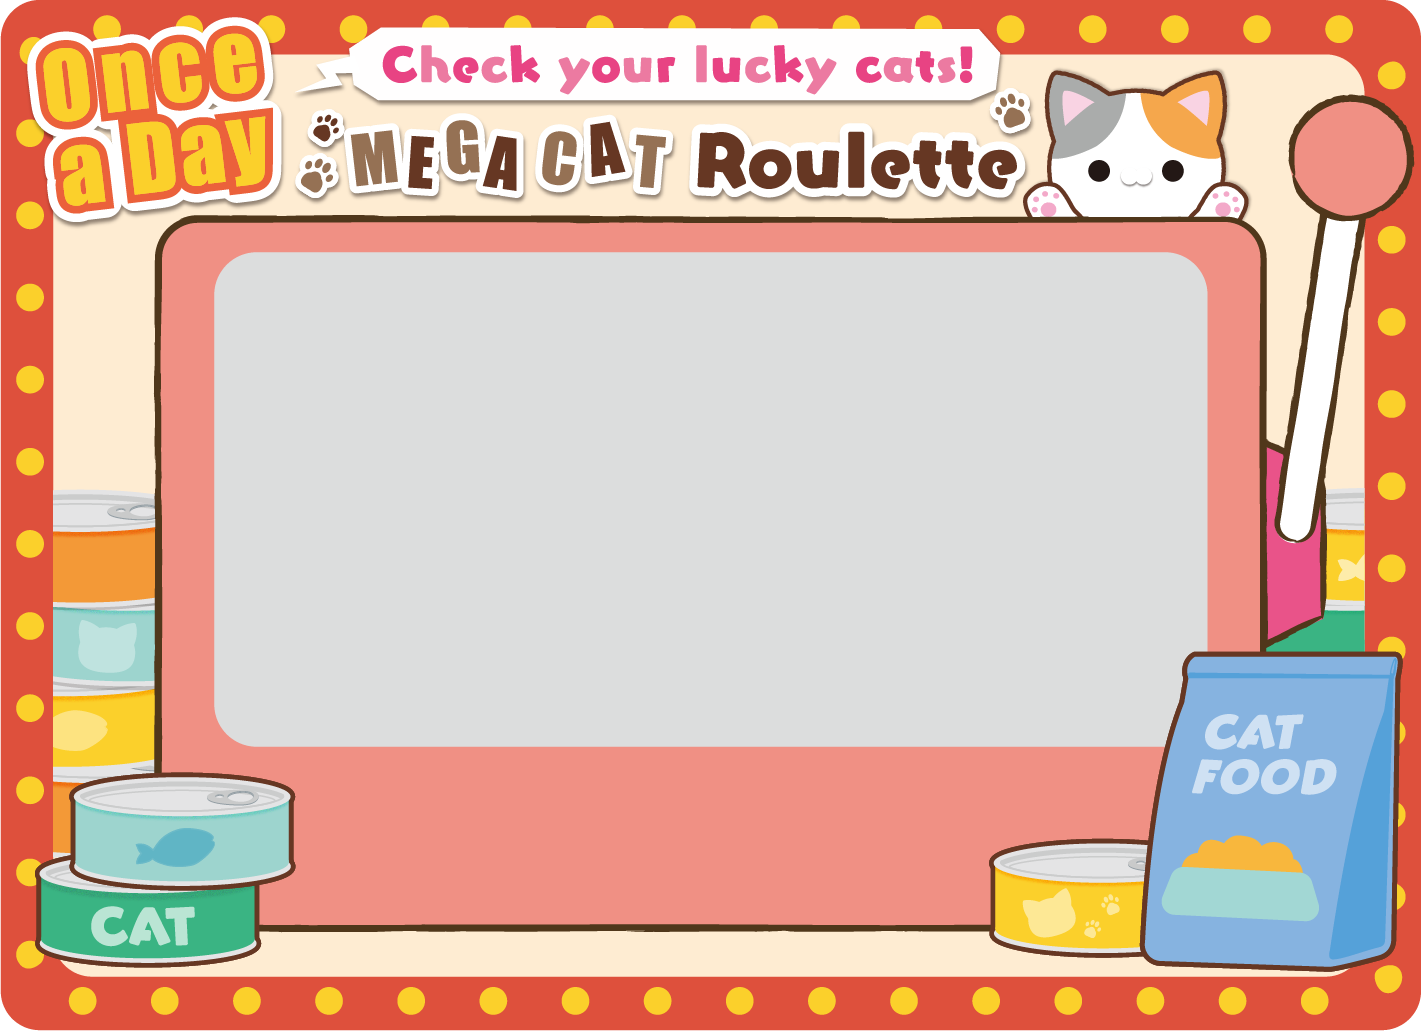 Check your lucky cats!Once a day MEGACAT Roulette